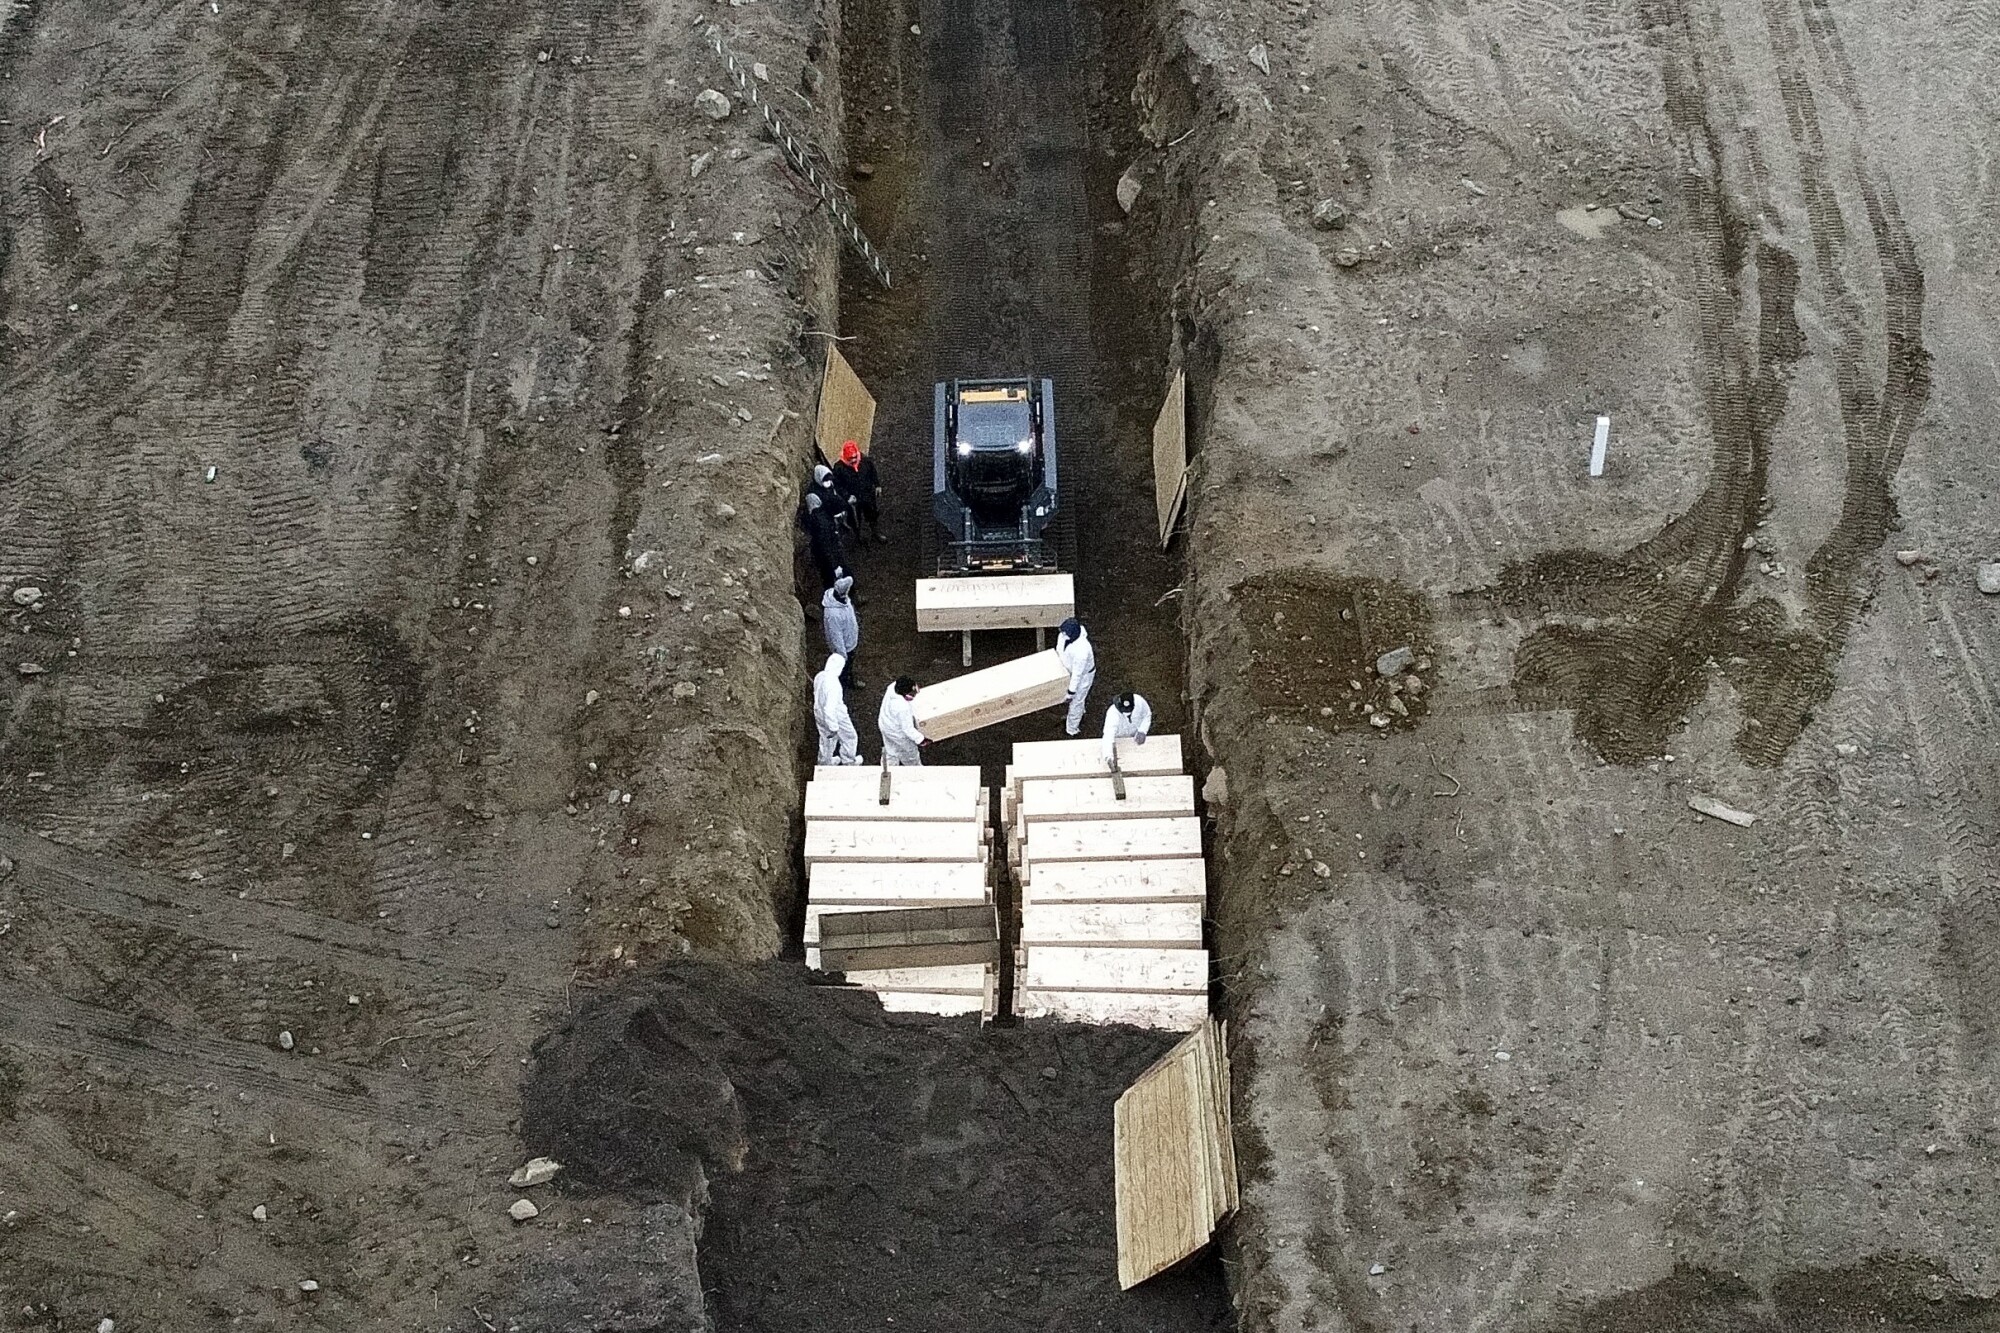 Workers bury bodies in a trench on New York City's Hart Island